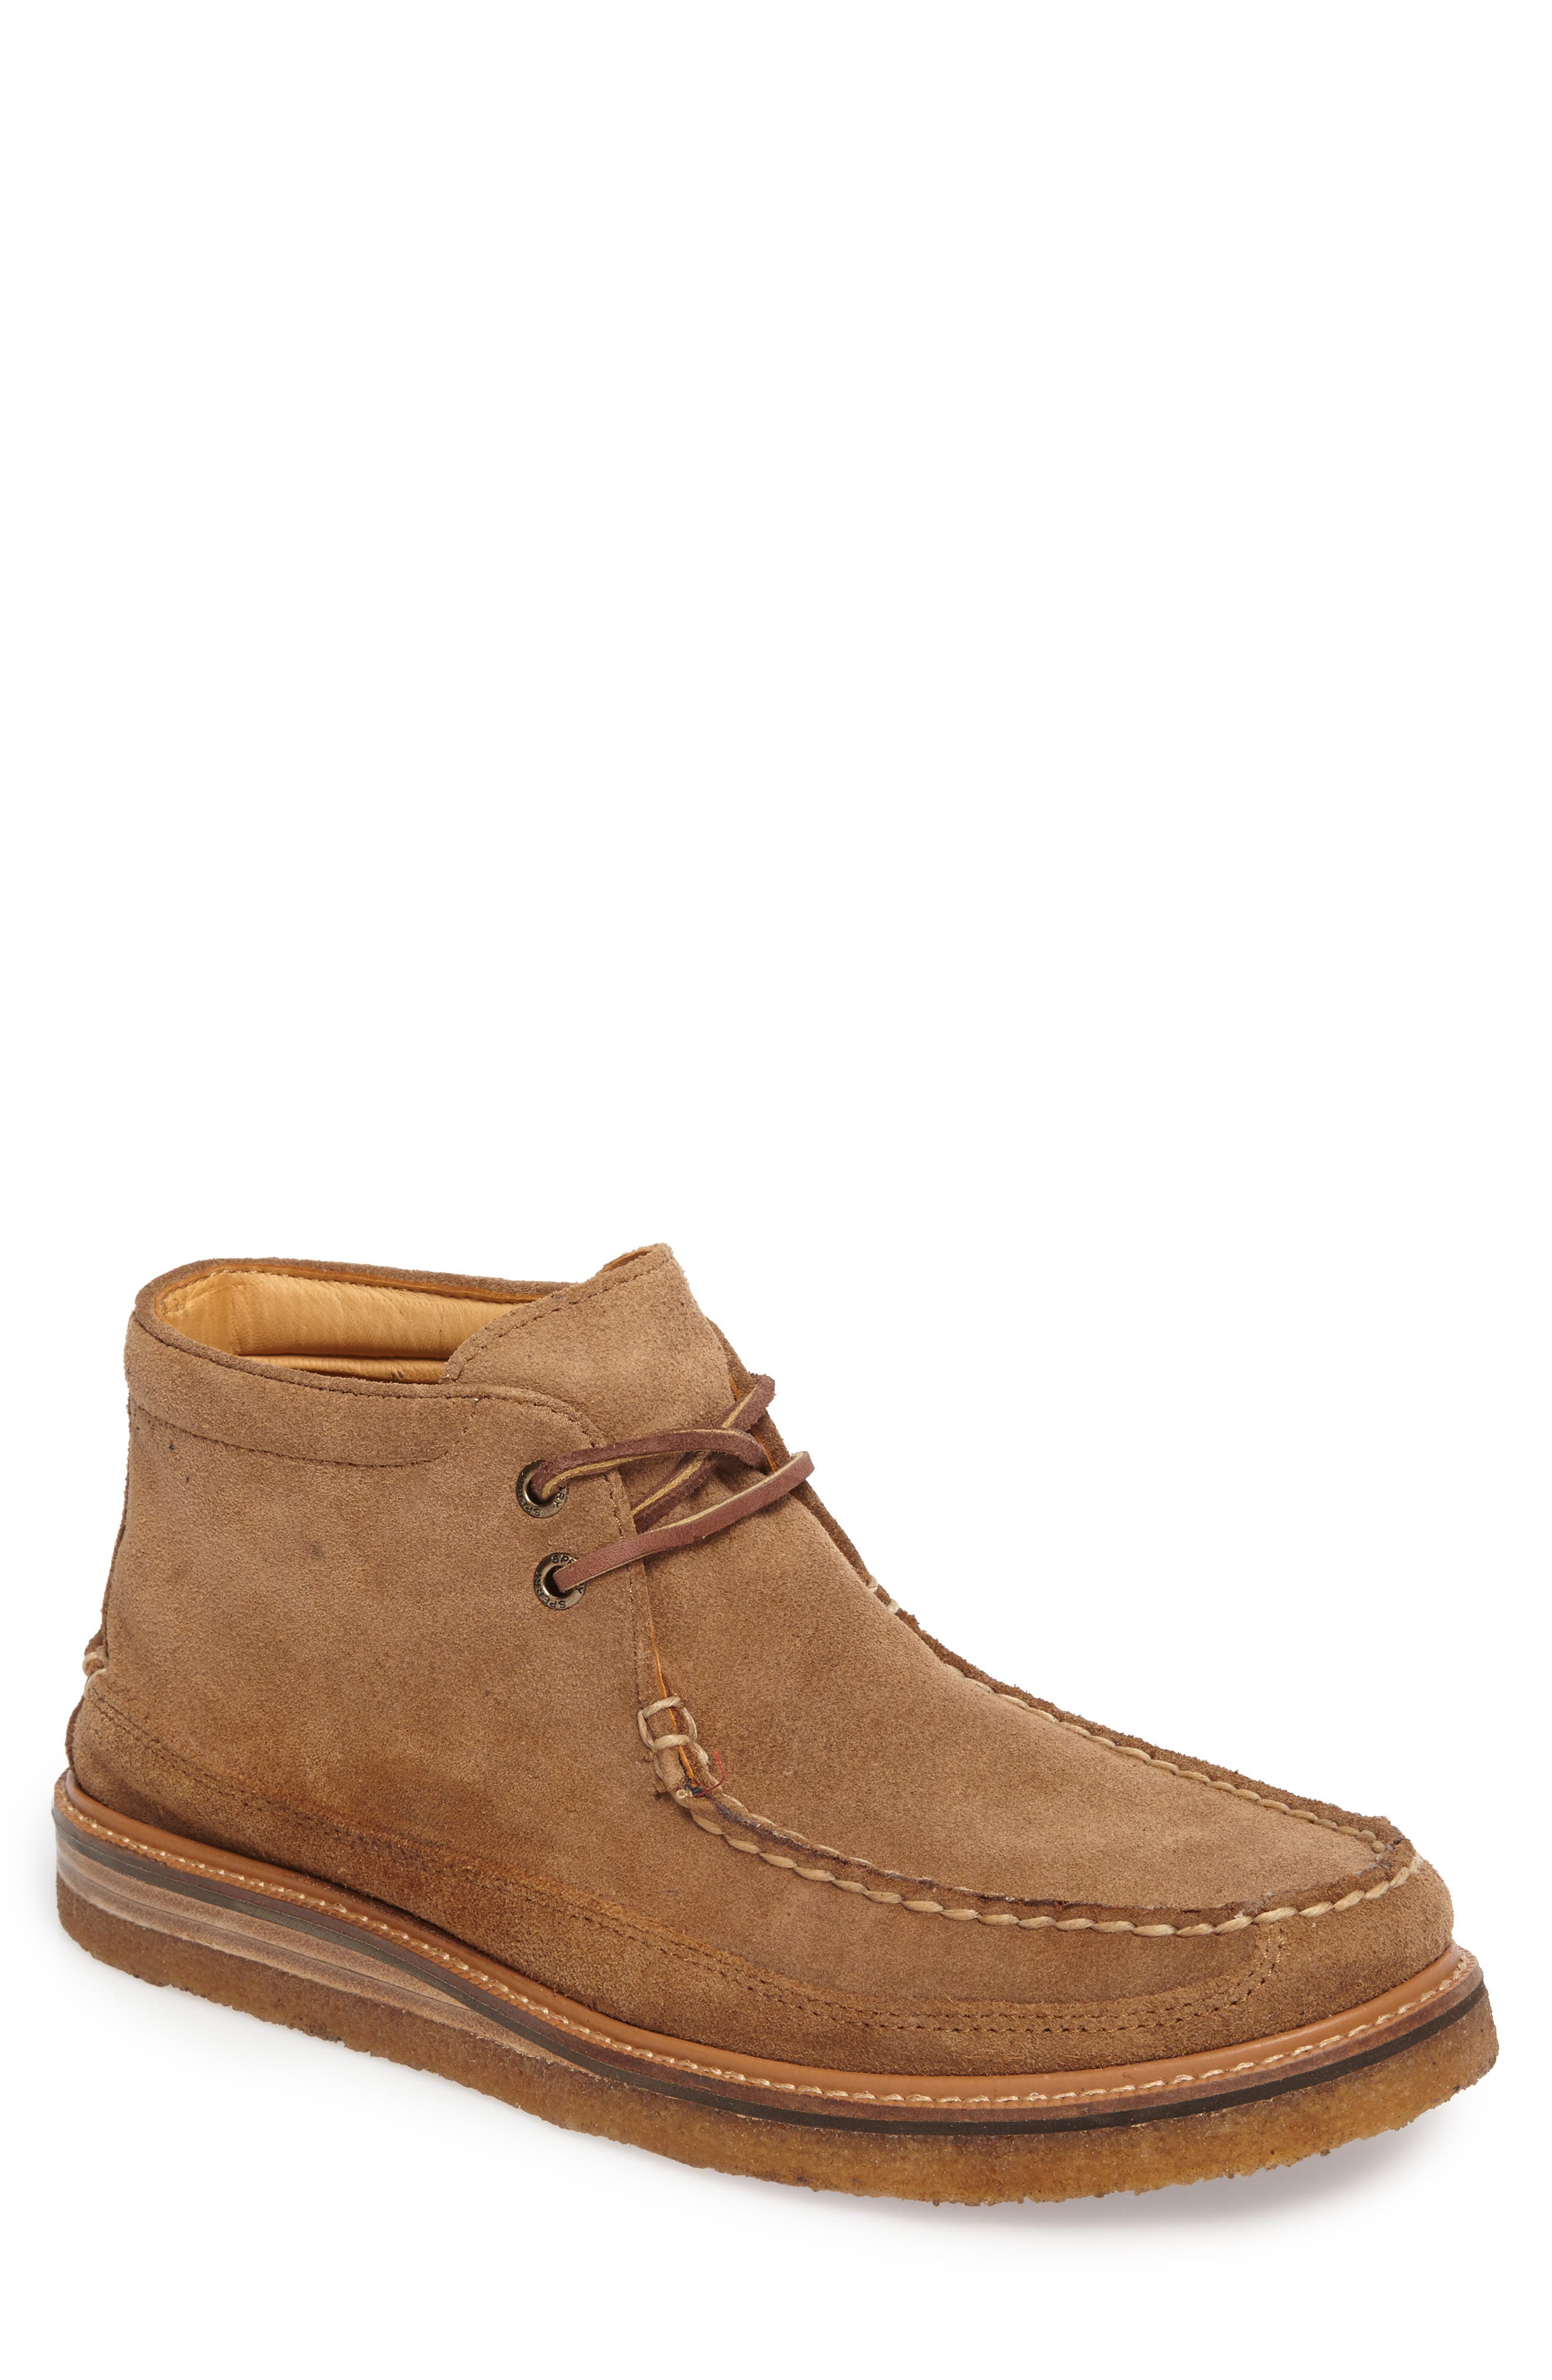 sperry gold cup chukka